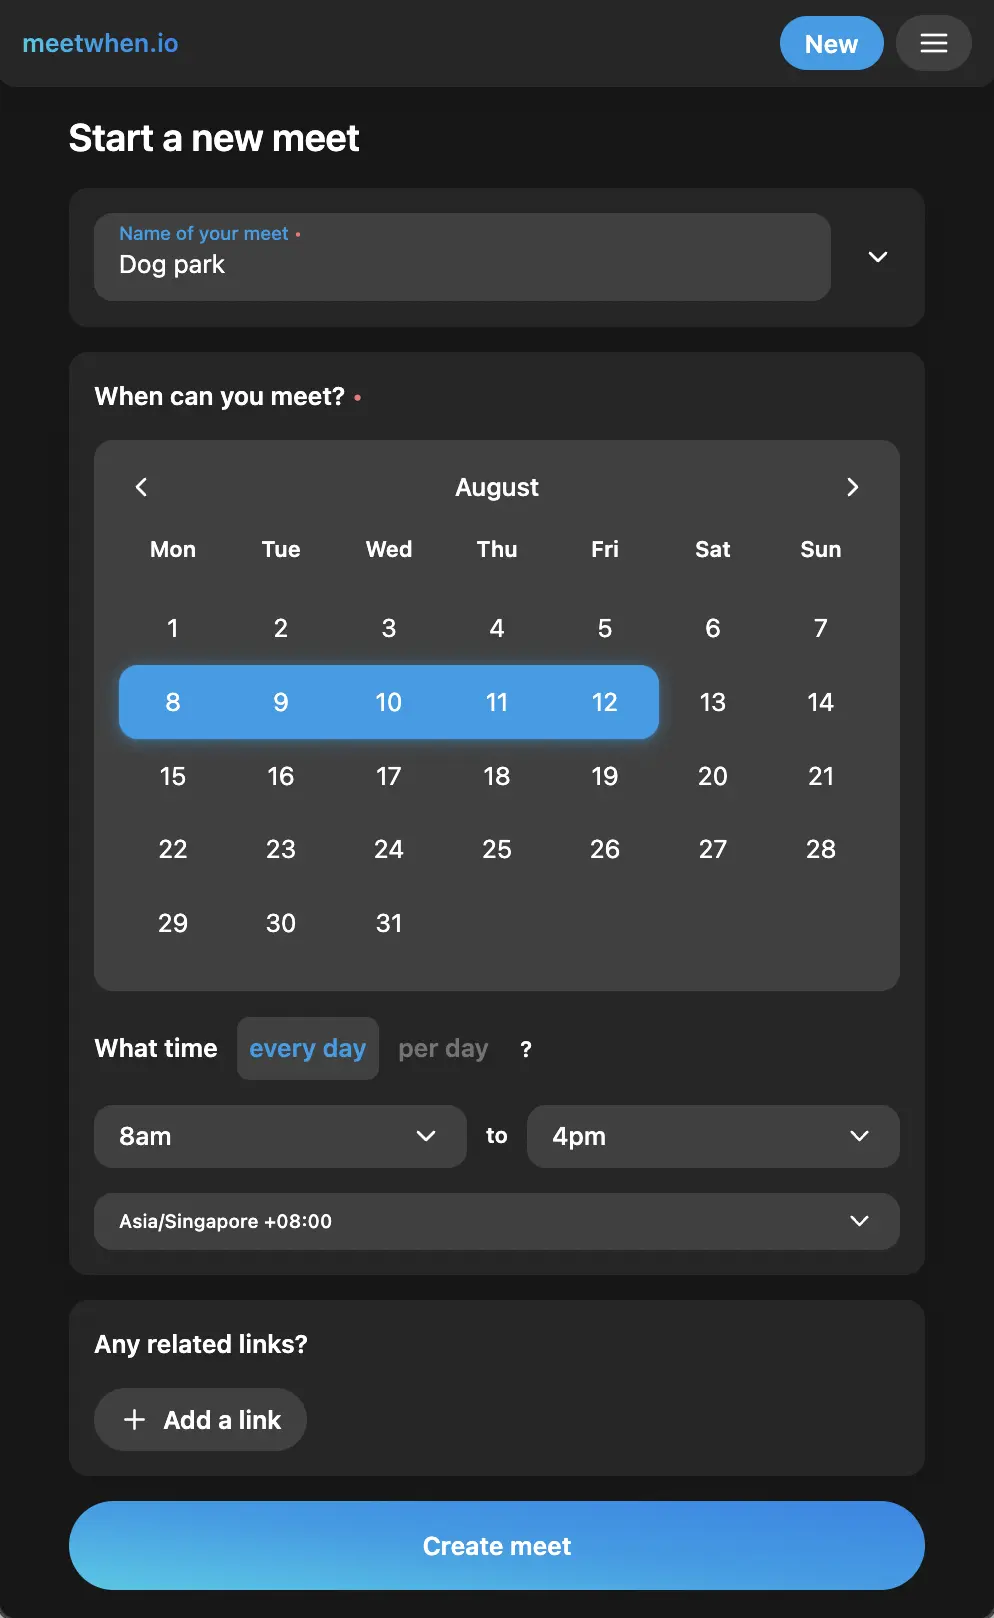 a screenshot of the event creation interface for a scheduling application I built called meetwhen